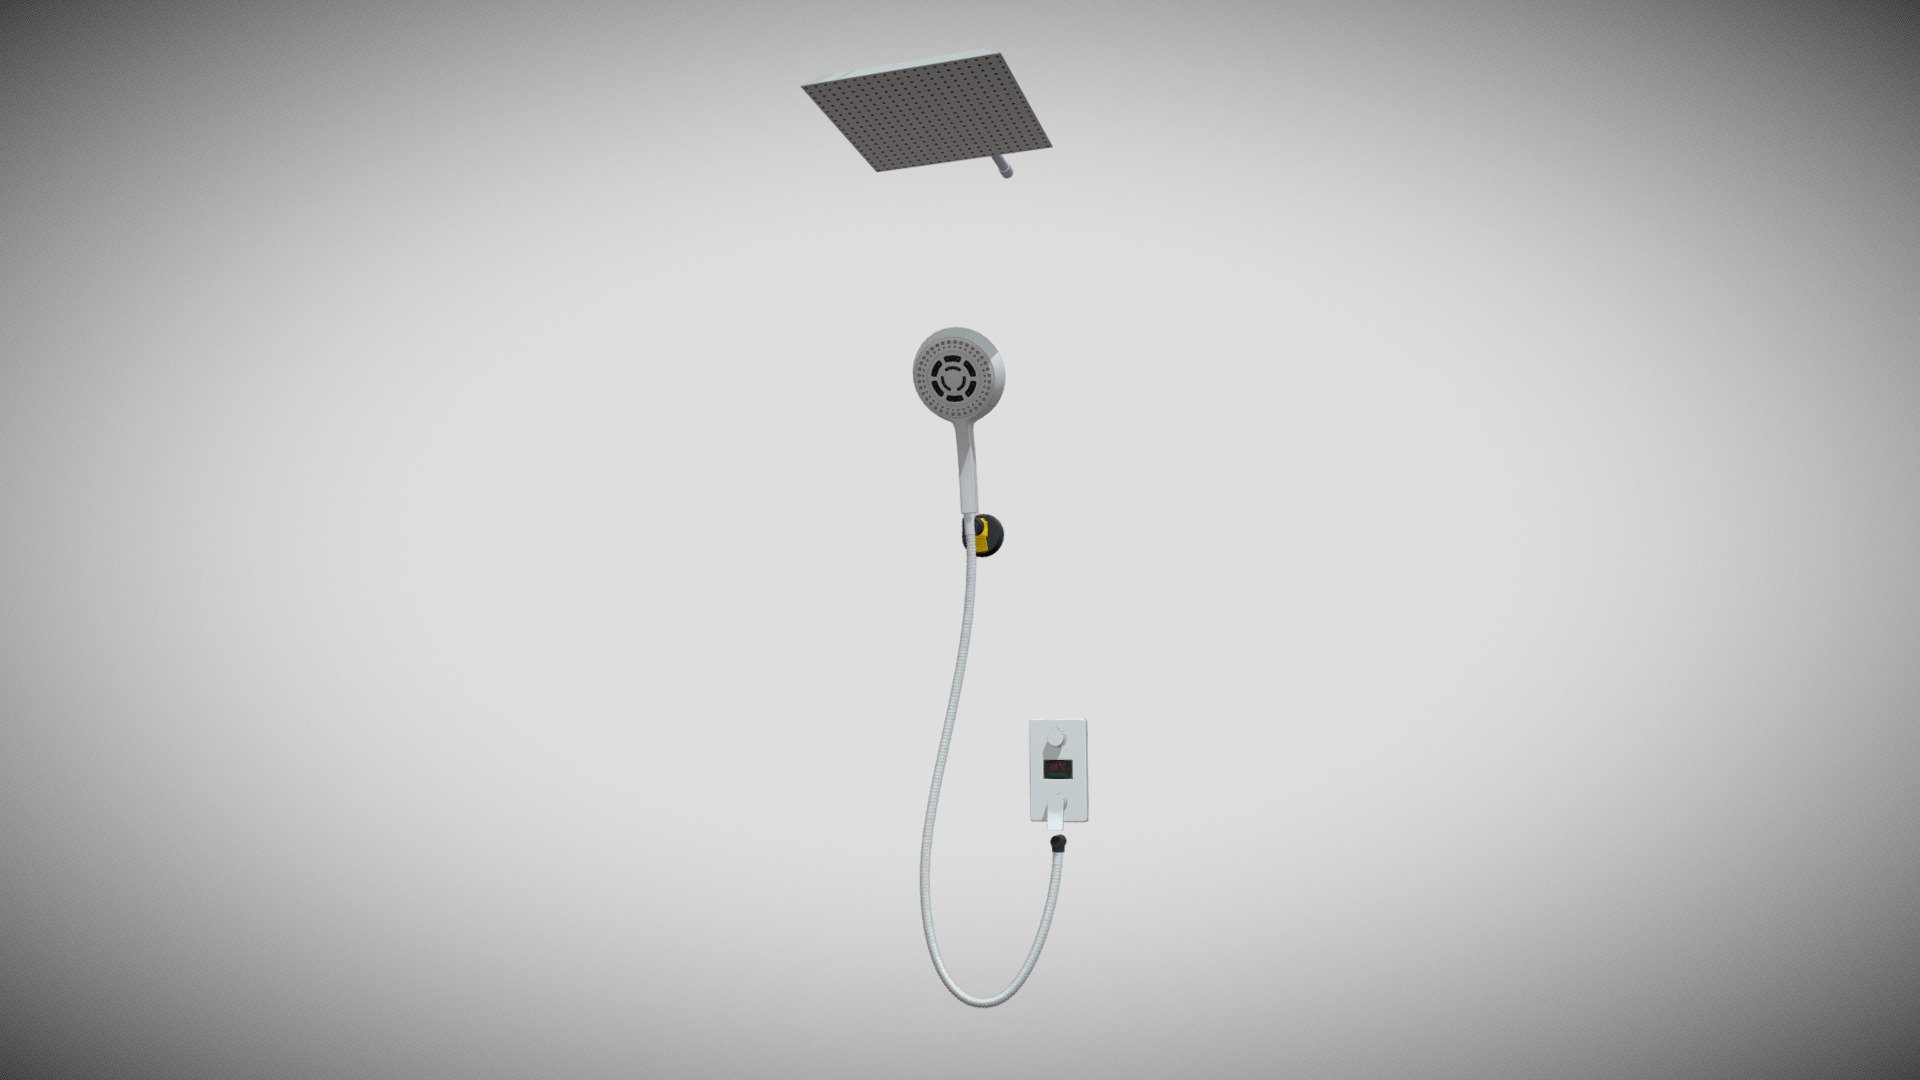 Detailed model of a Rain Mixer Shower, modeled in Cinema 4D.The model was created using approximate real world dimensions.

The model has 95,385 polys and 100,949 vertices.

An additional file has been provided containing the original Cinema 4D project files with both standard and v-ray materials and other 3d export files such as 3ds, fbx and obj 3d model